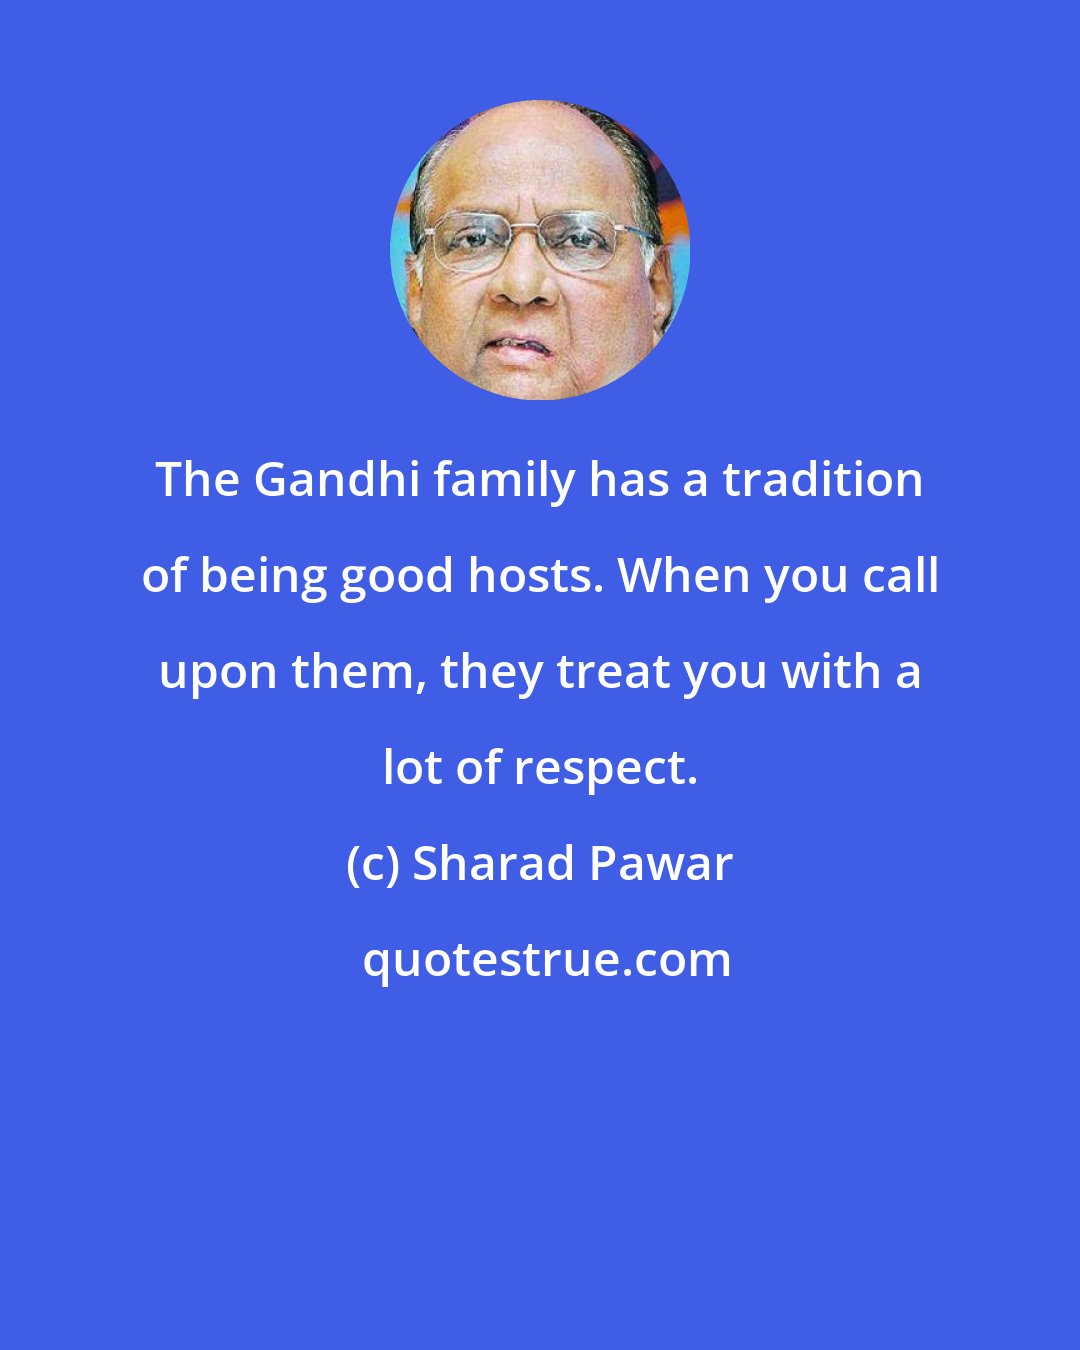 Sharad Pawar: The Gandhi family has a tradition of being good hosts. When you call upon them, they treat you with a lot of respect.